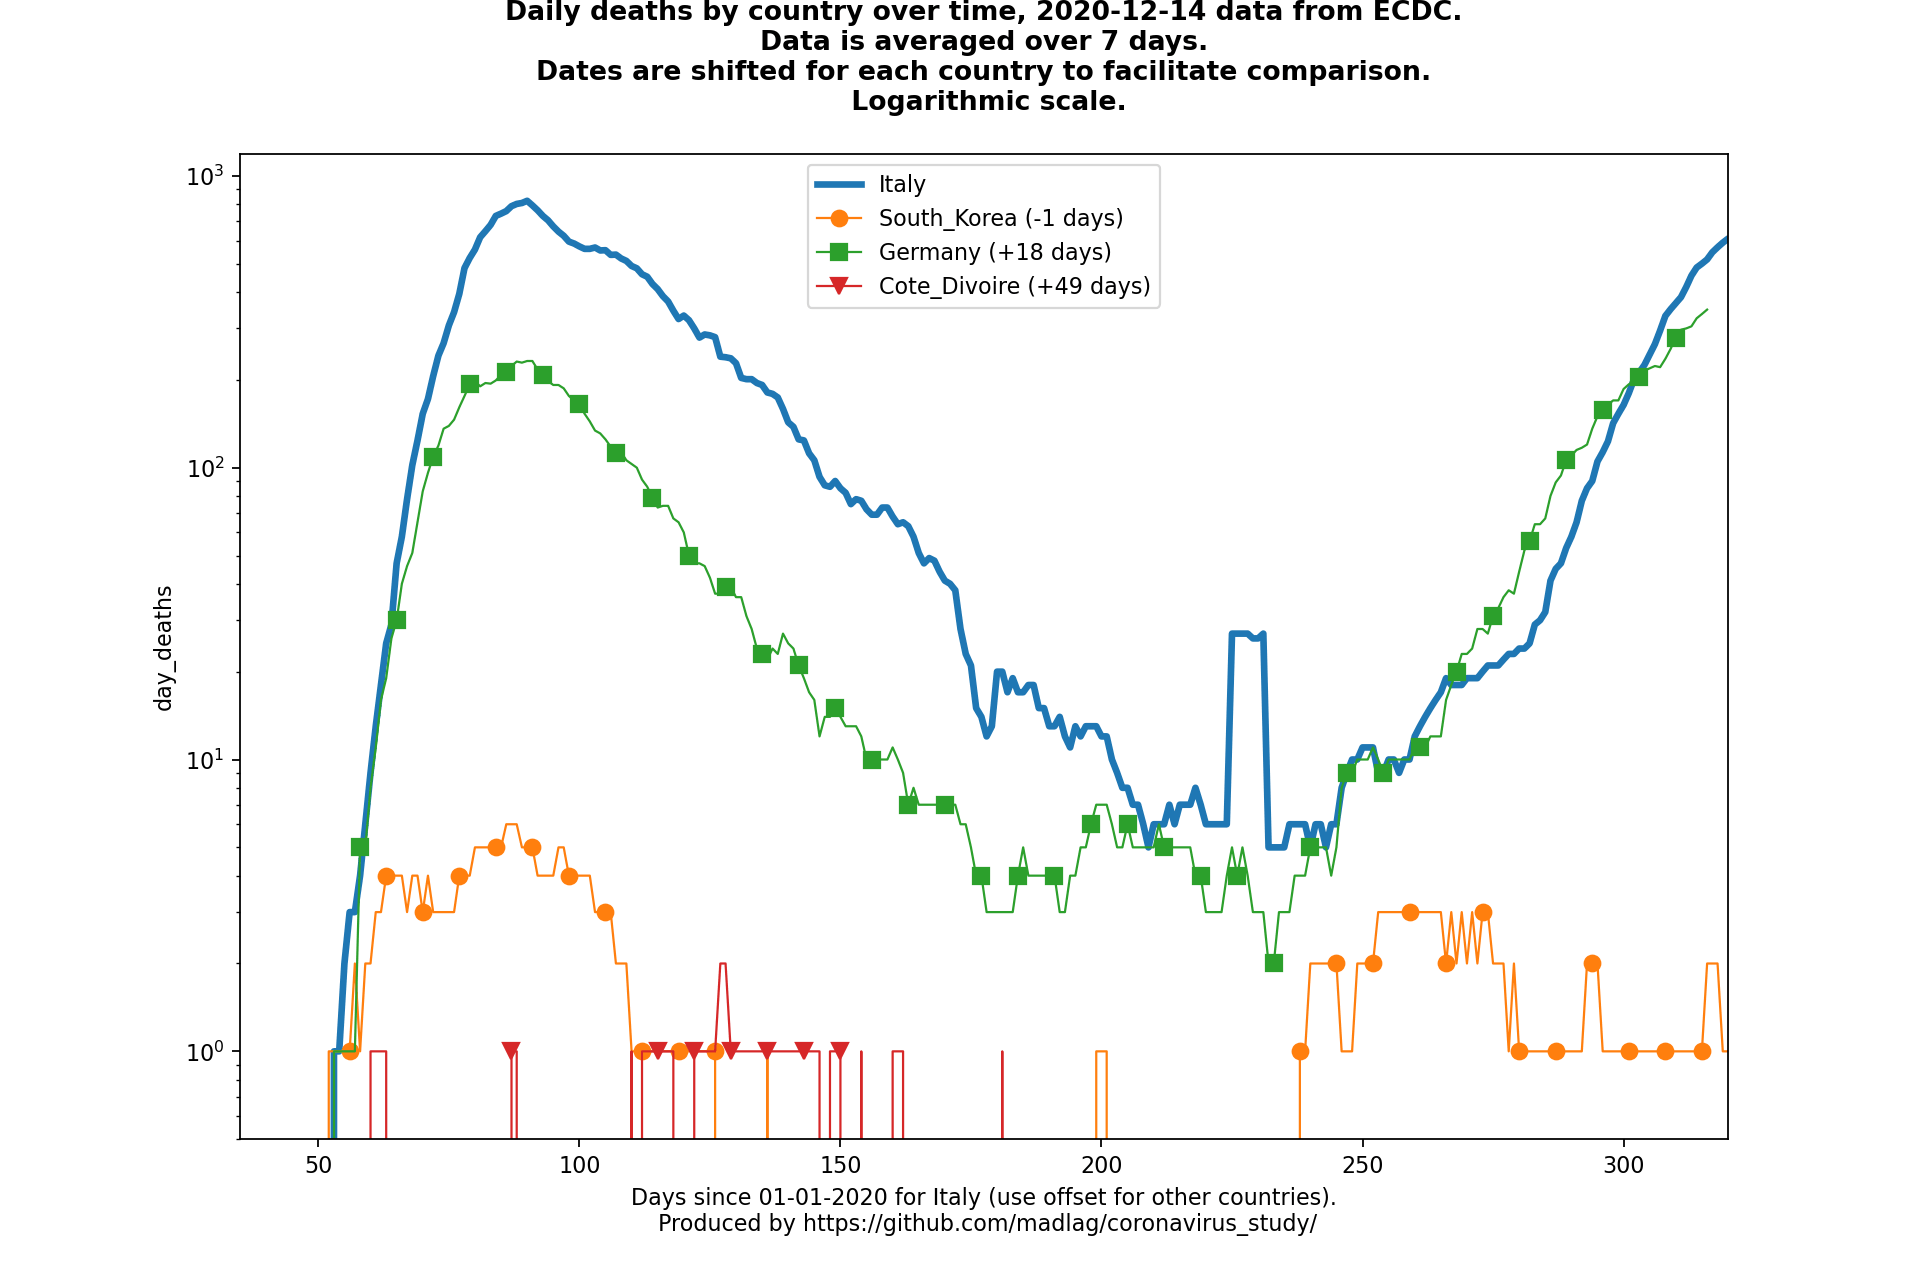 Cote Divoire covid-19 daily deaths animated chart